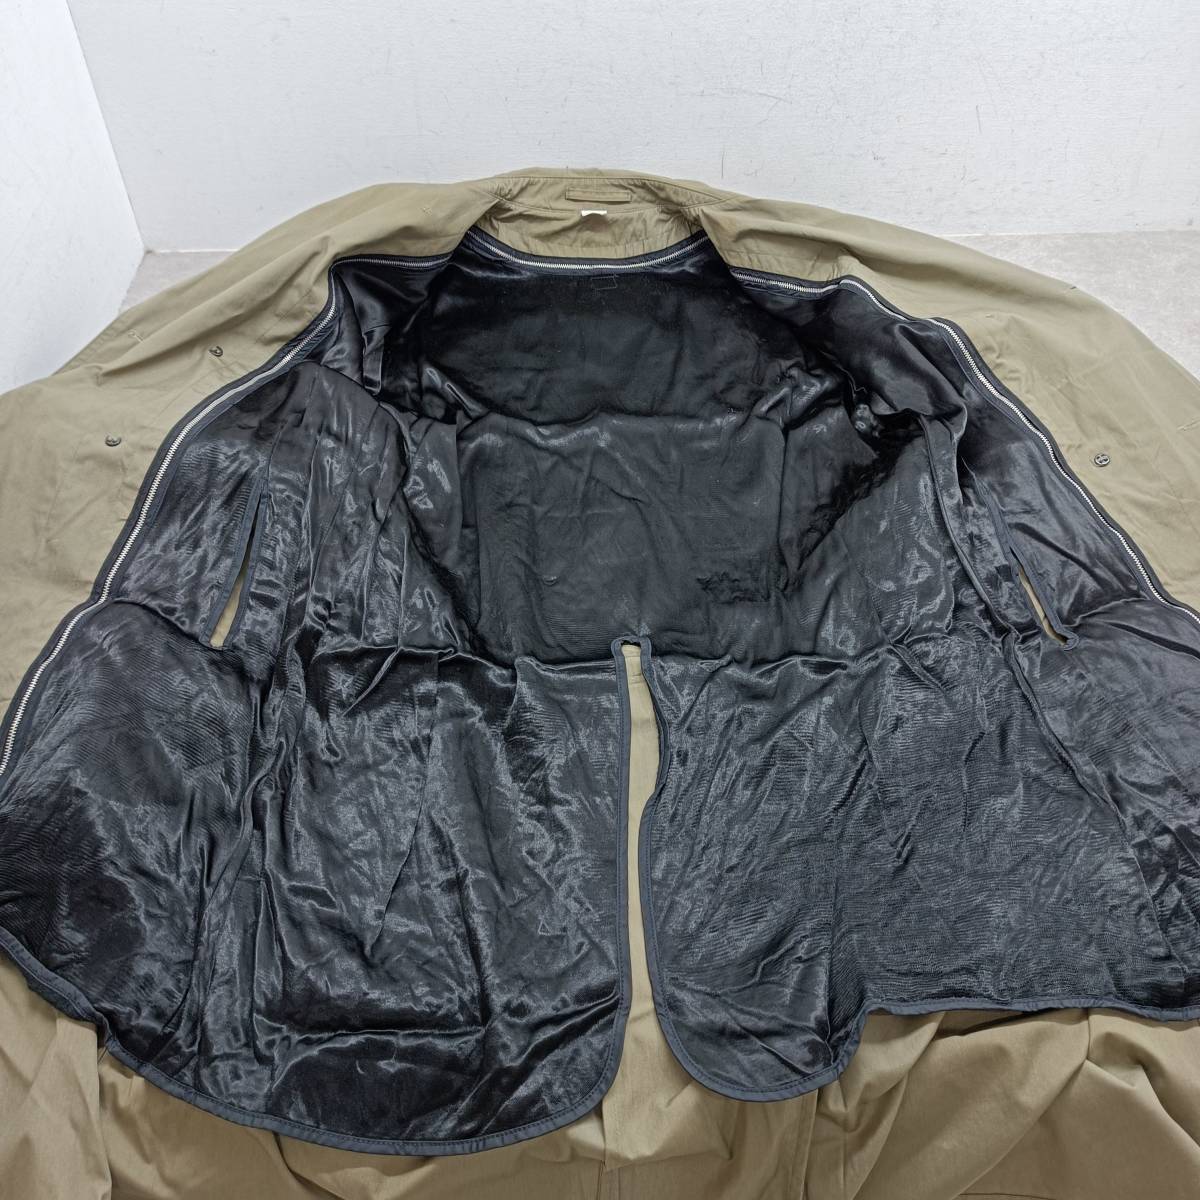 G554☆送料無料☆US.ARMY 90年代 ライナー付 オールウェザーコート『8405-01-107-0230』SIZE/34R KHK All Whether Coat 米軍 ミリタリー